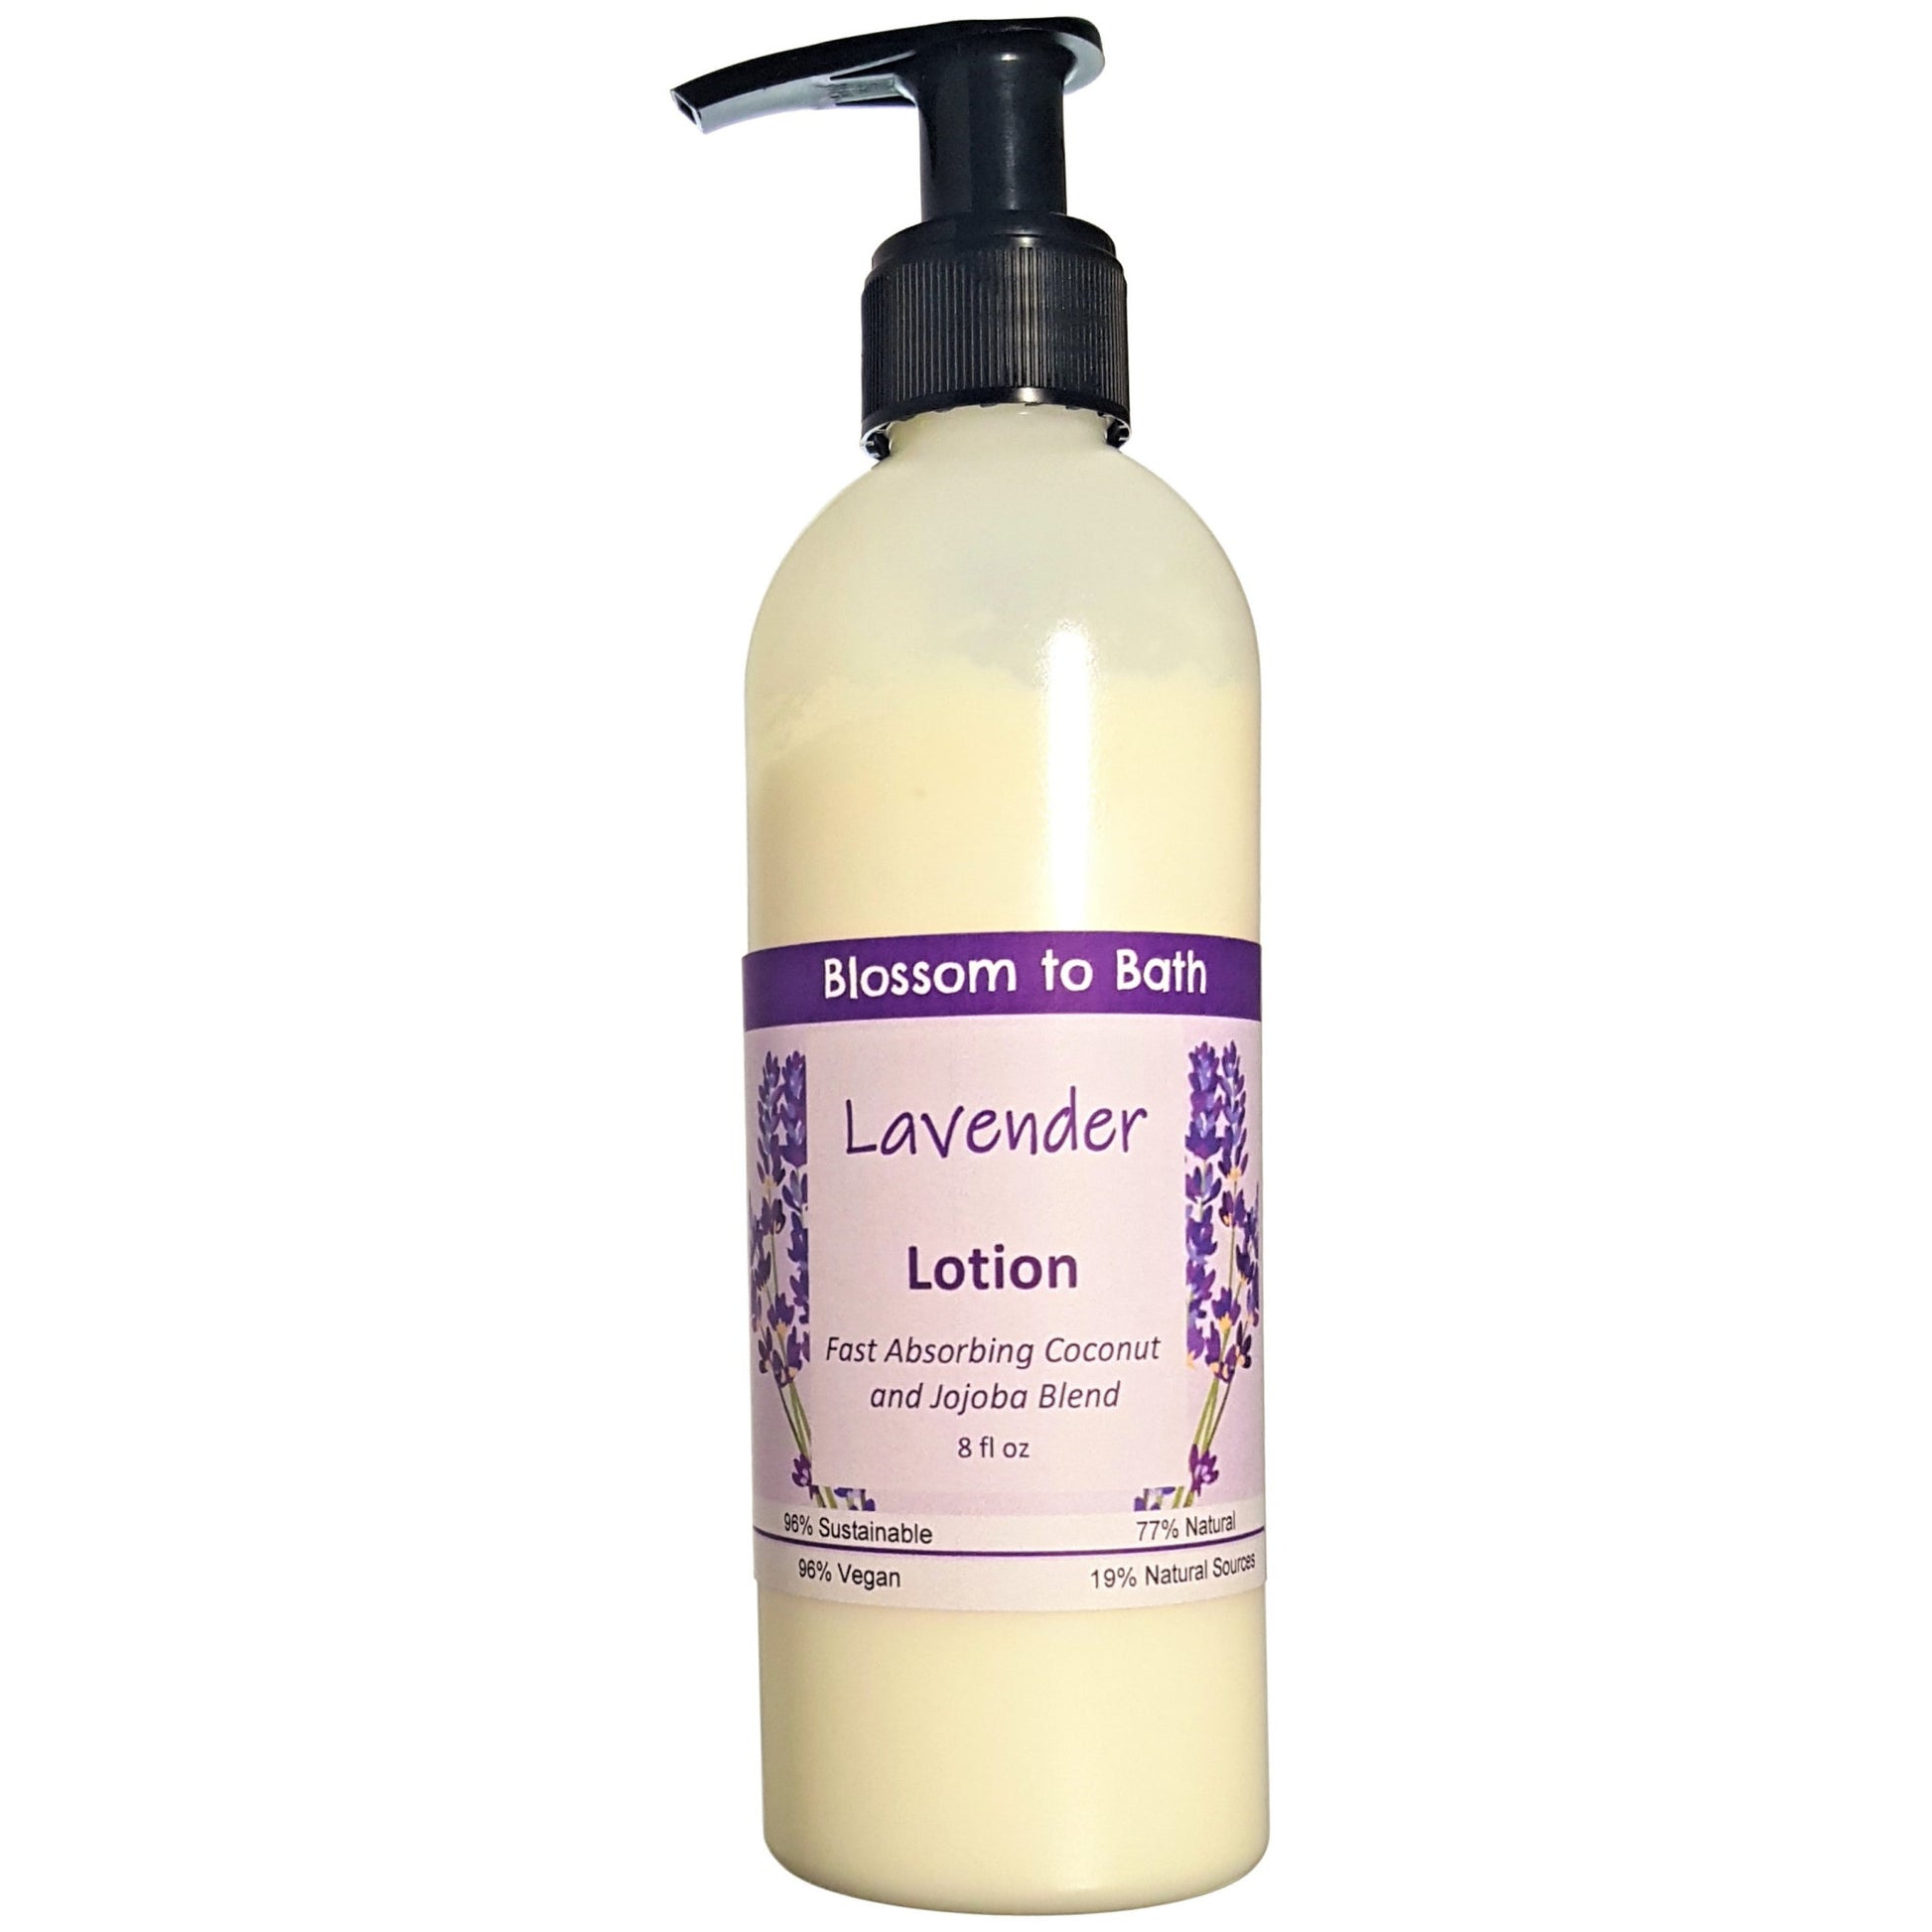 Buy Blossom to Bath Lavender Lotion from Flowersong Soap Studio.  Daily moisture luxury that soaks in quickly made with organic oils and butters that soften and smooth the skin  Classic lavender scent that is relaxing and comforting.